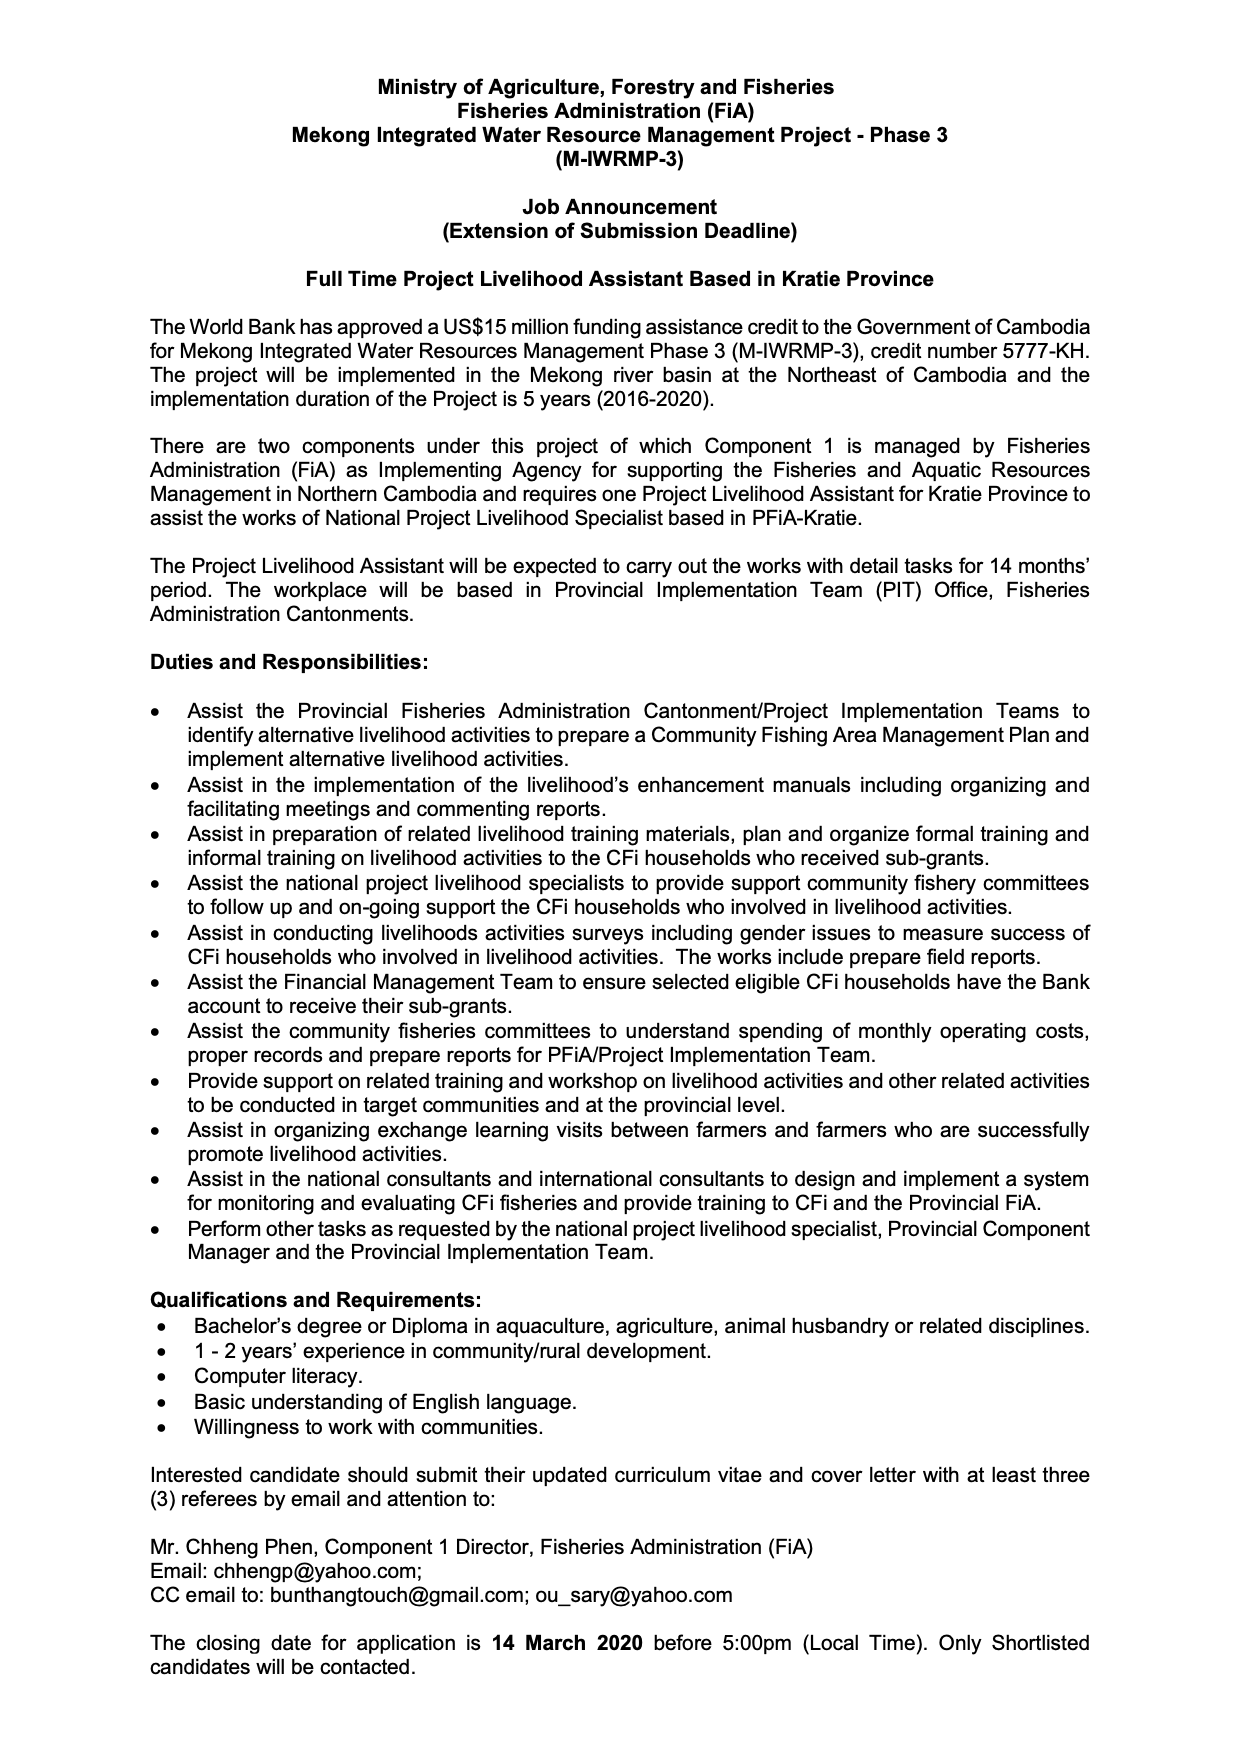 Full-Time Project Livelihood Assistant based in Kratie province